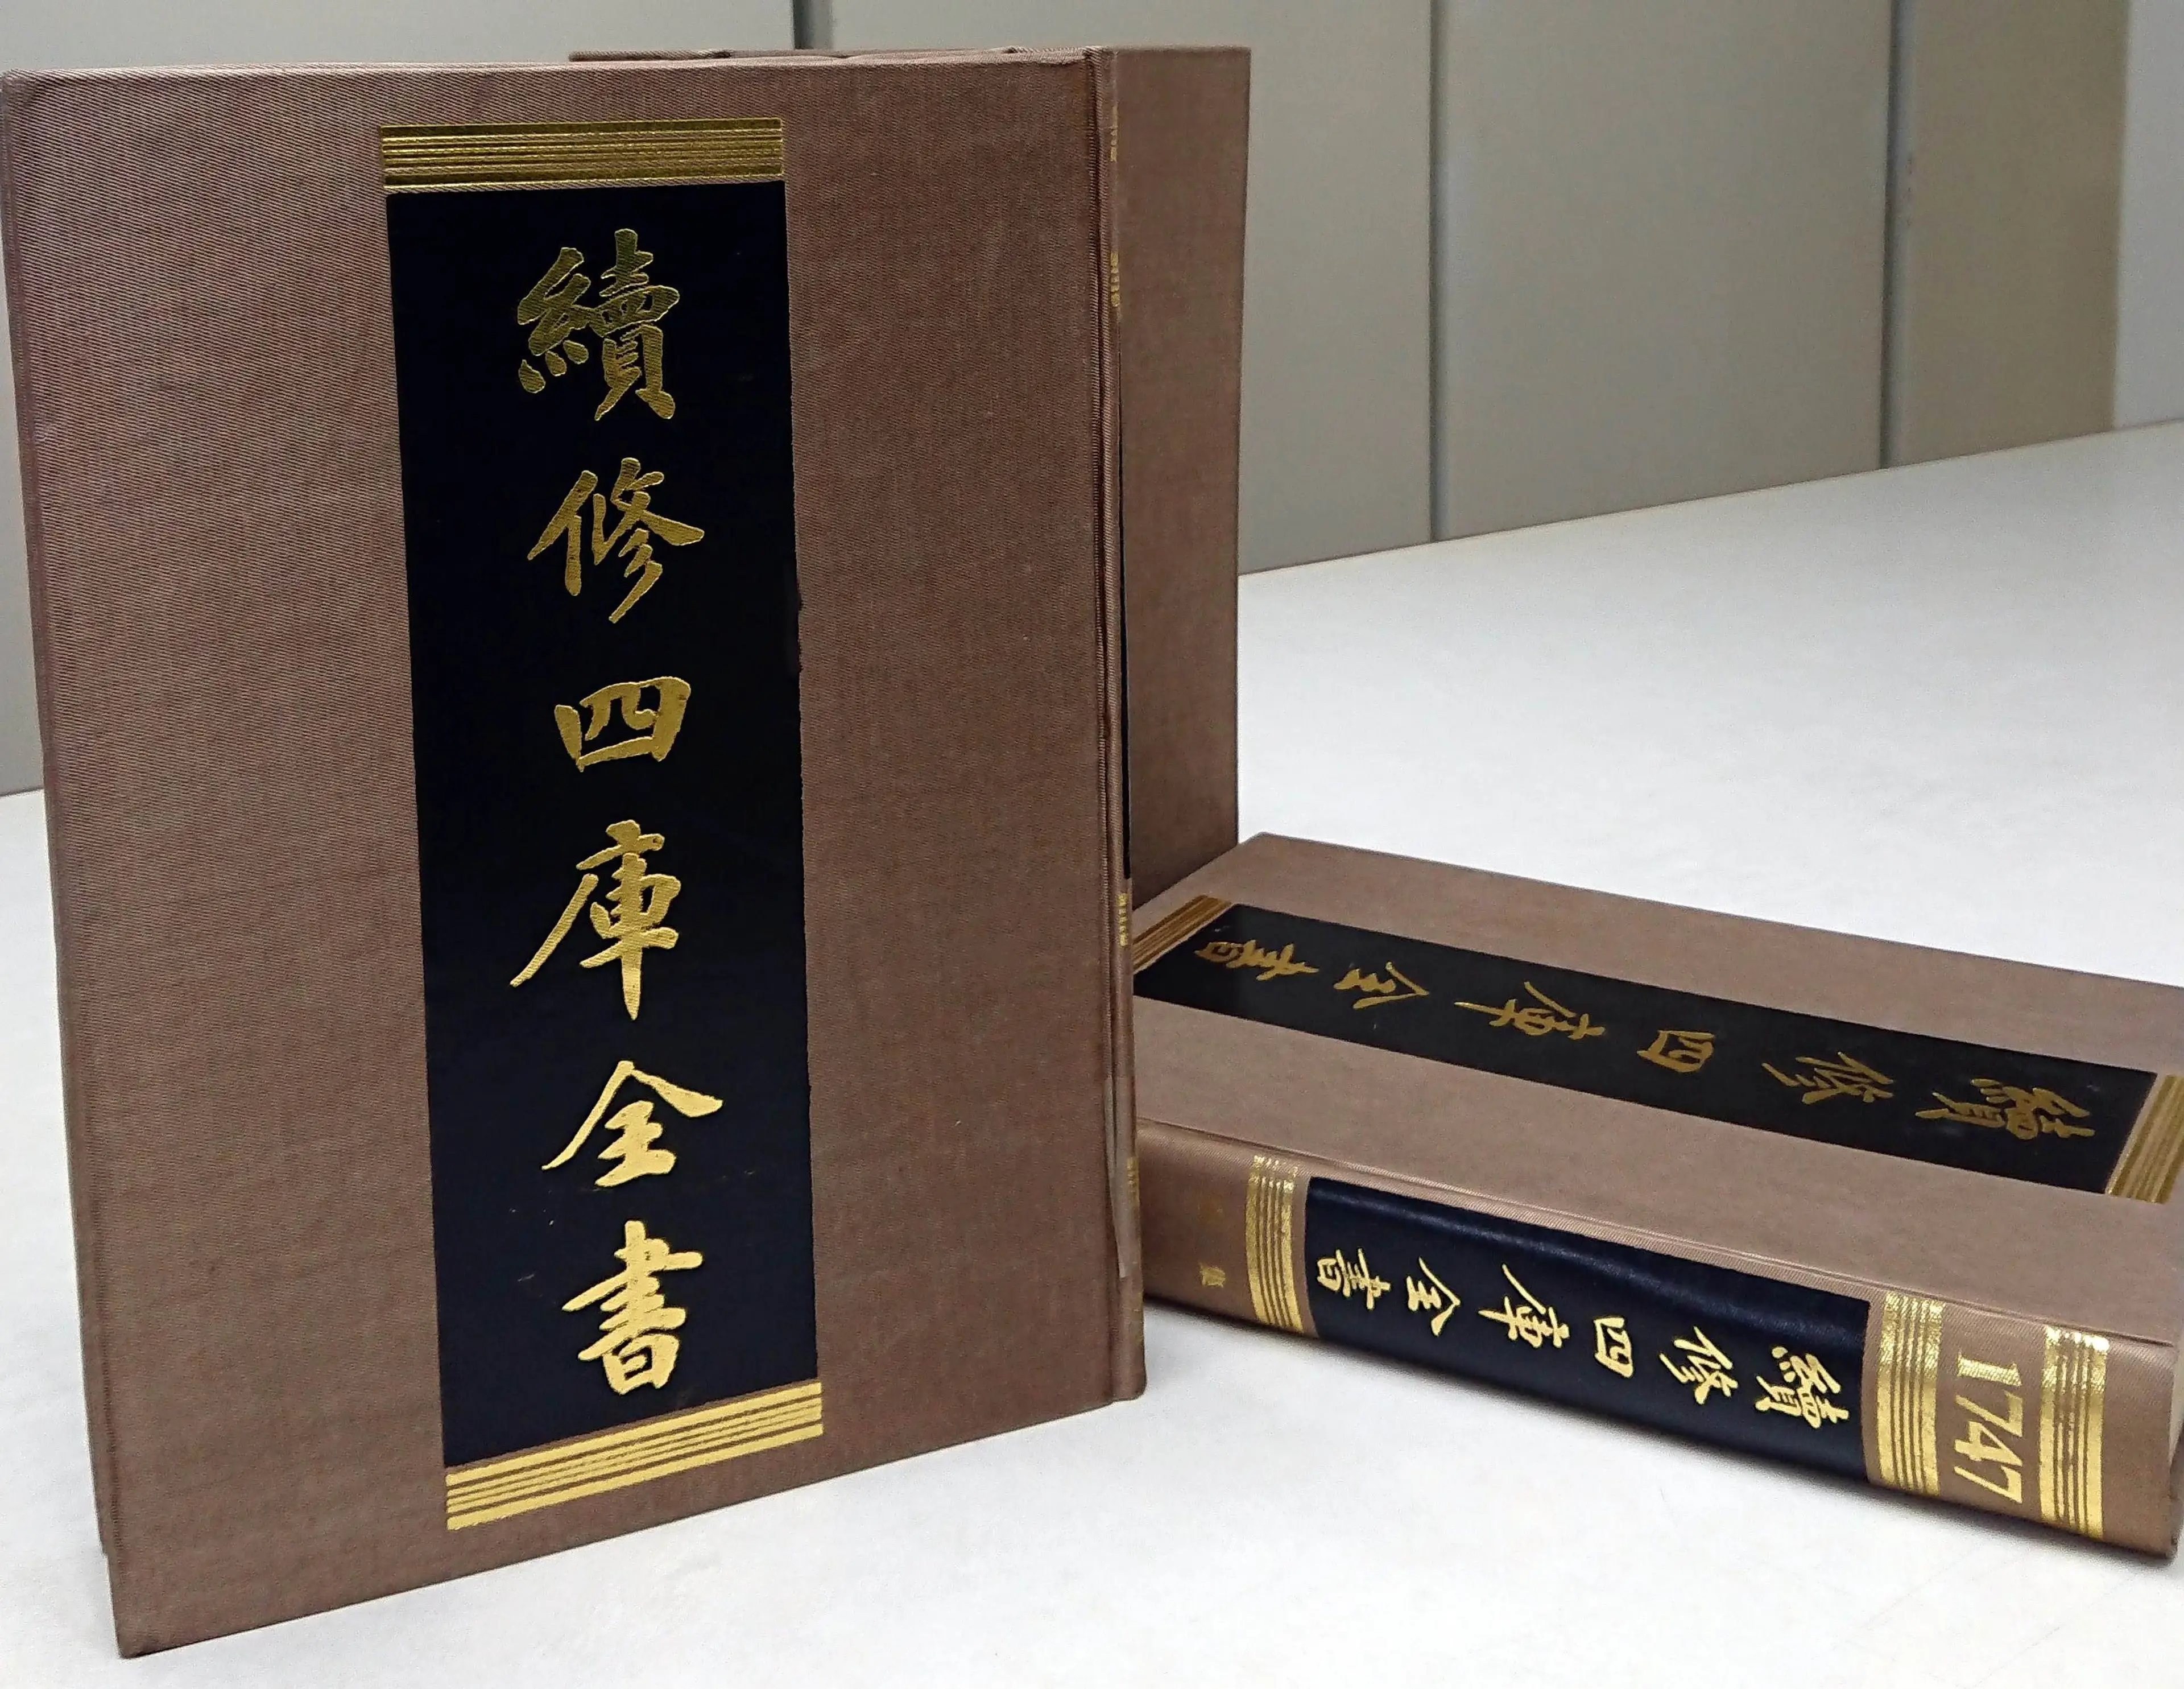 The version I read. Published by Shanghai Ancient Books Publishing House, the Baoning Hall edition from the second year of the Daoguang period in the Qing Dynasty.